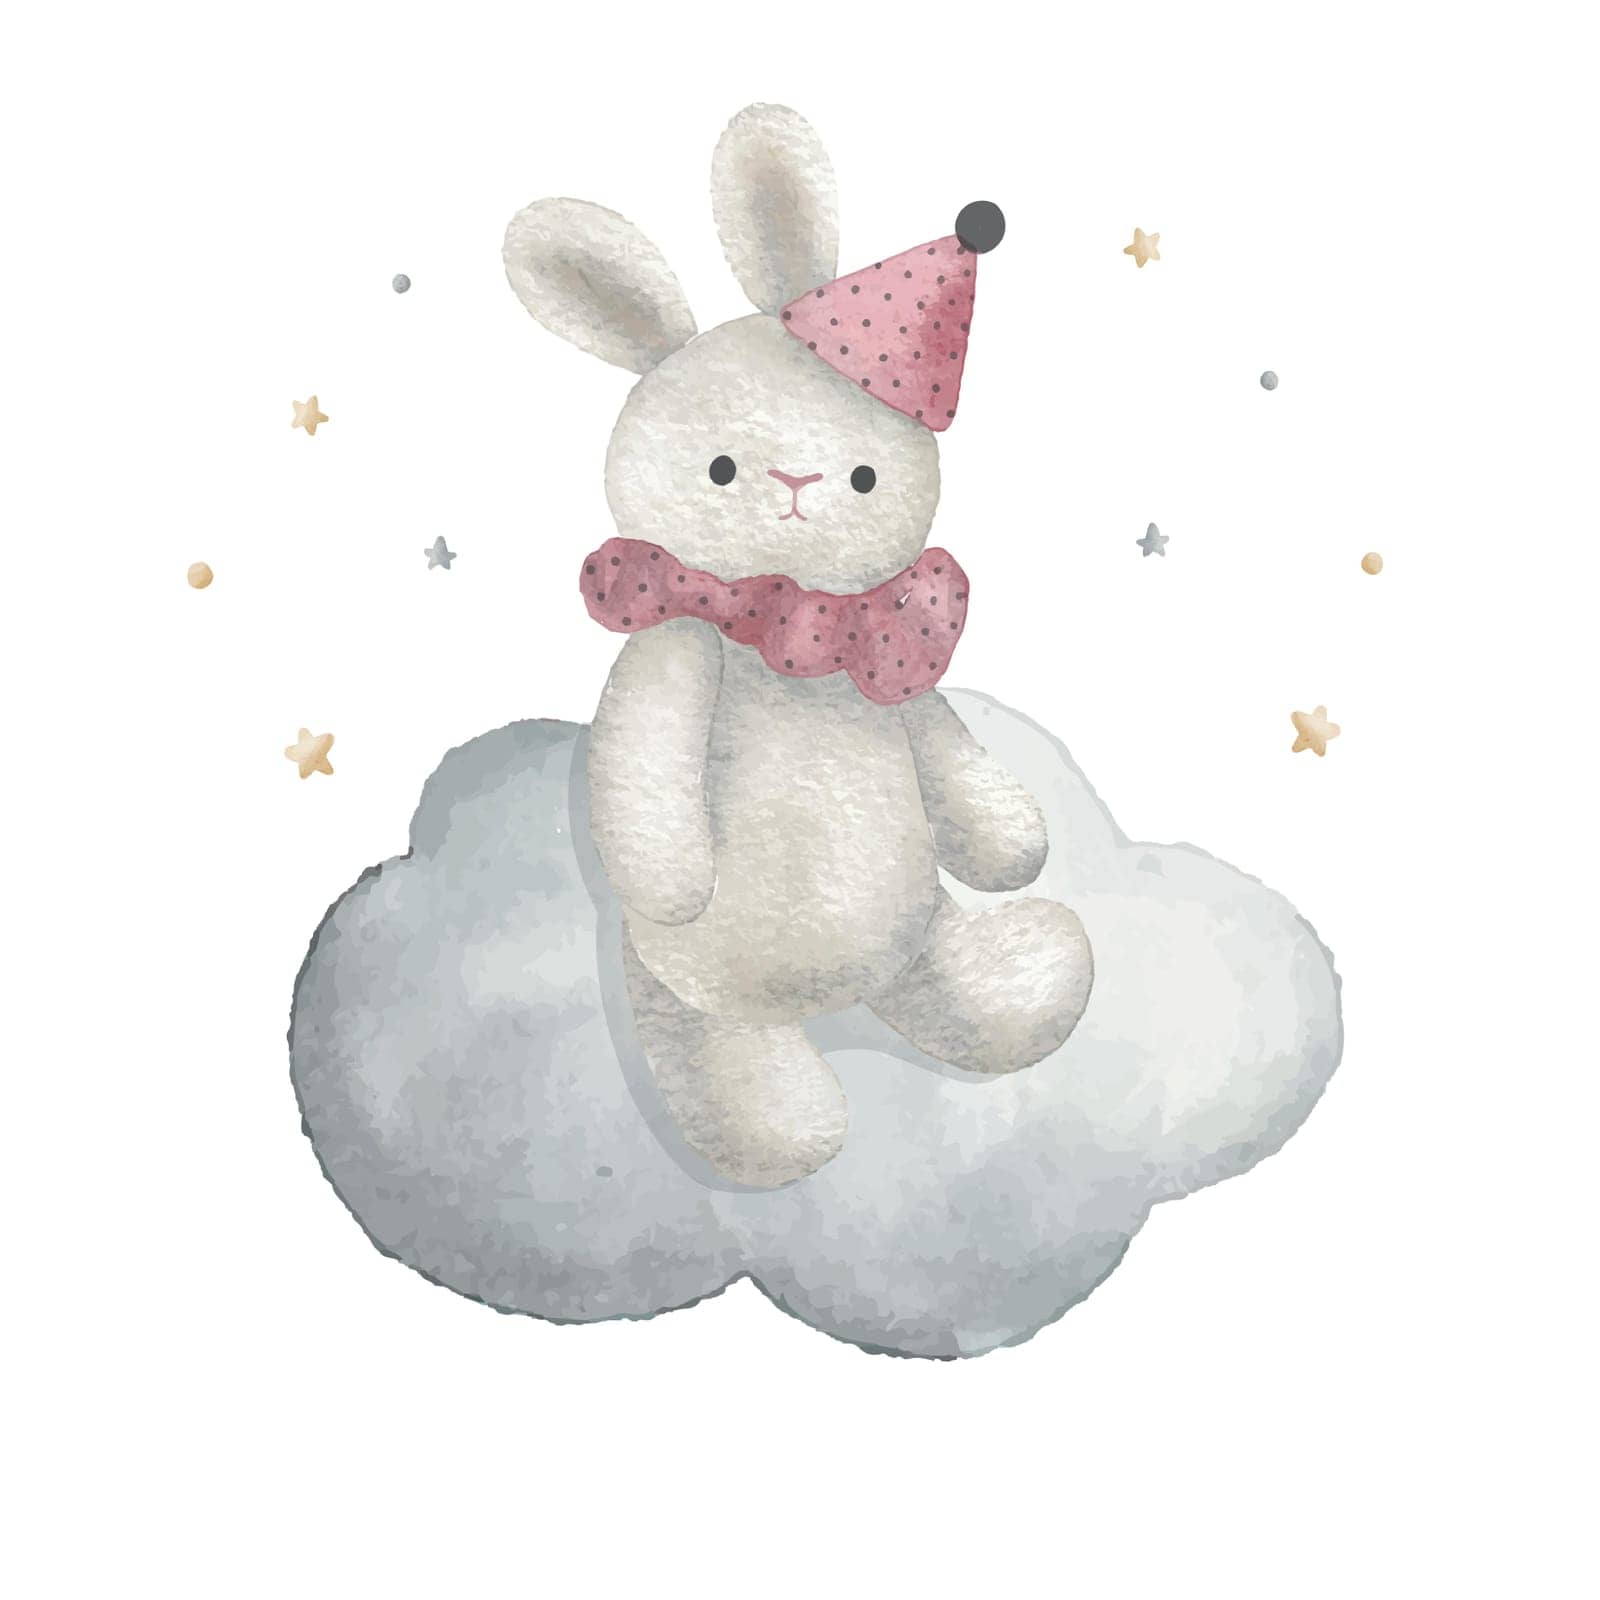 Cute bunny on the cloud with little stars, watercolor vector illustration